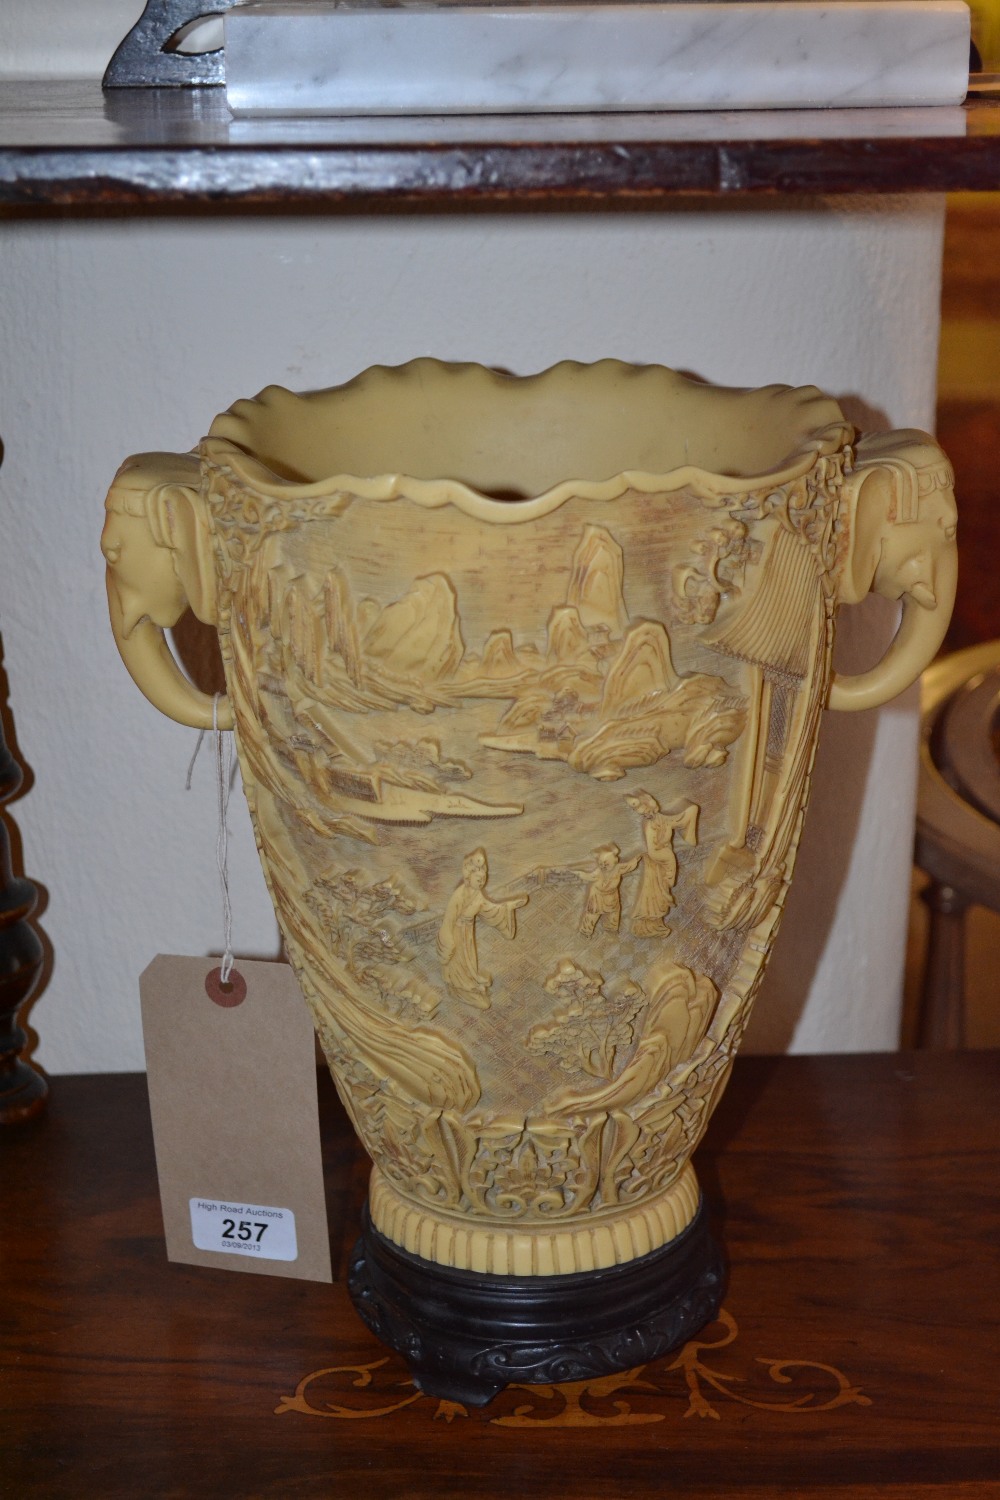 A large Oriental vase of faux ivory appearance with pierced elephant handles, mid 20th century or